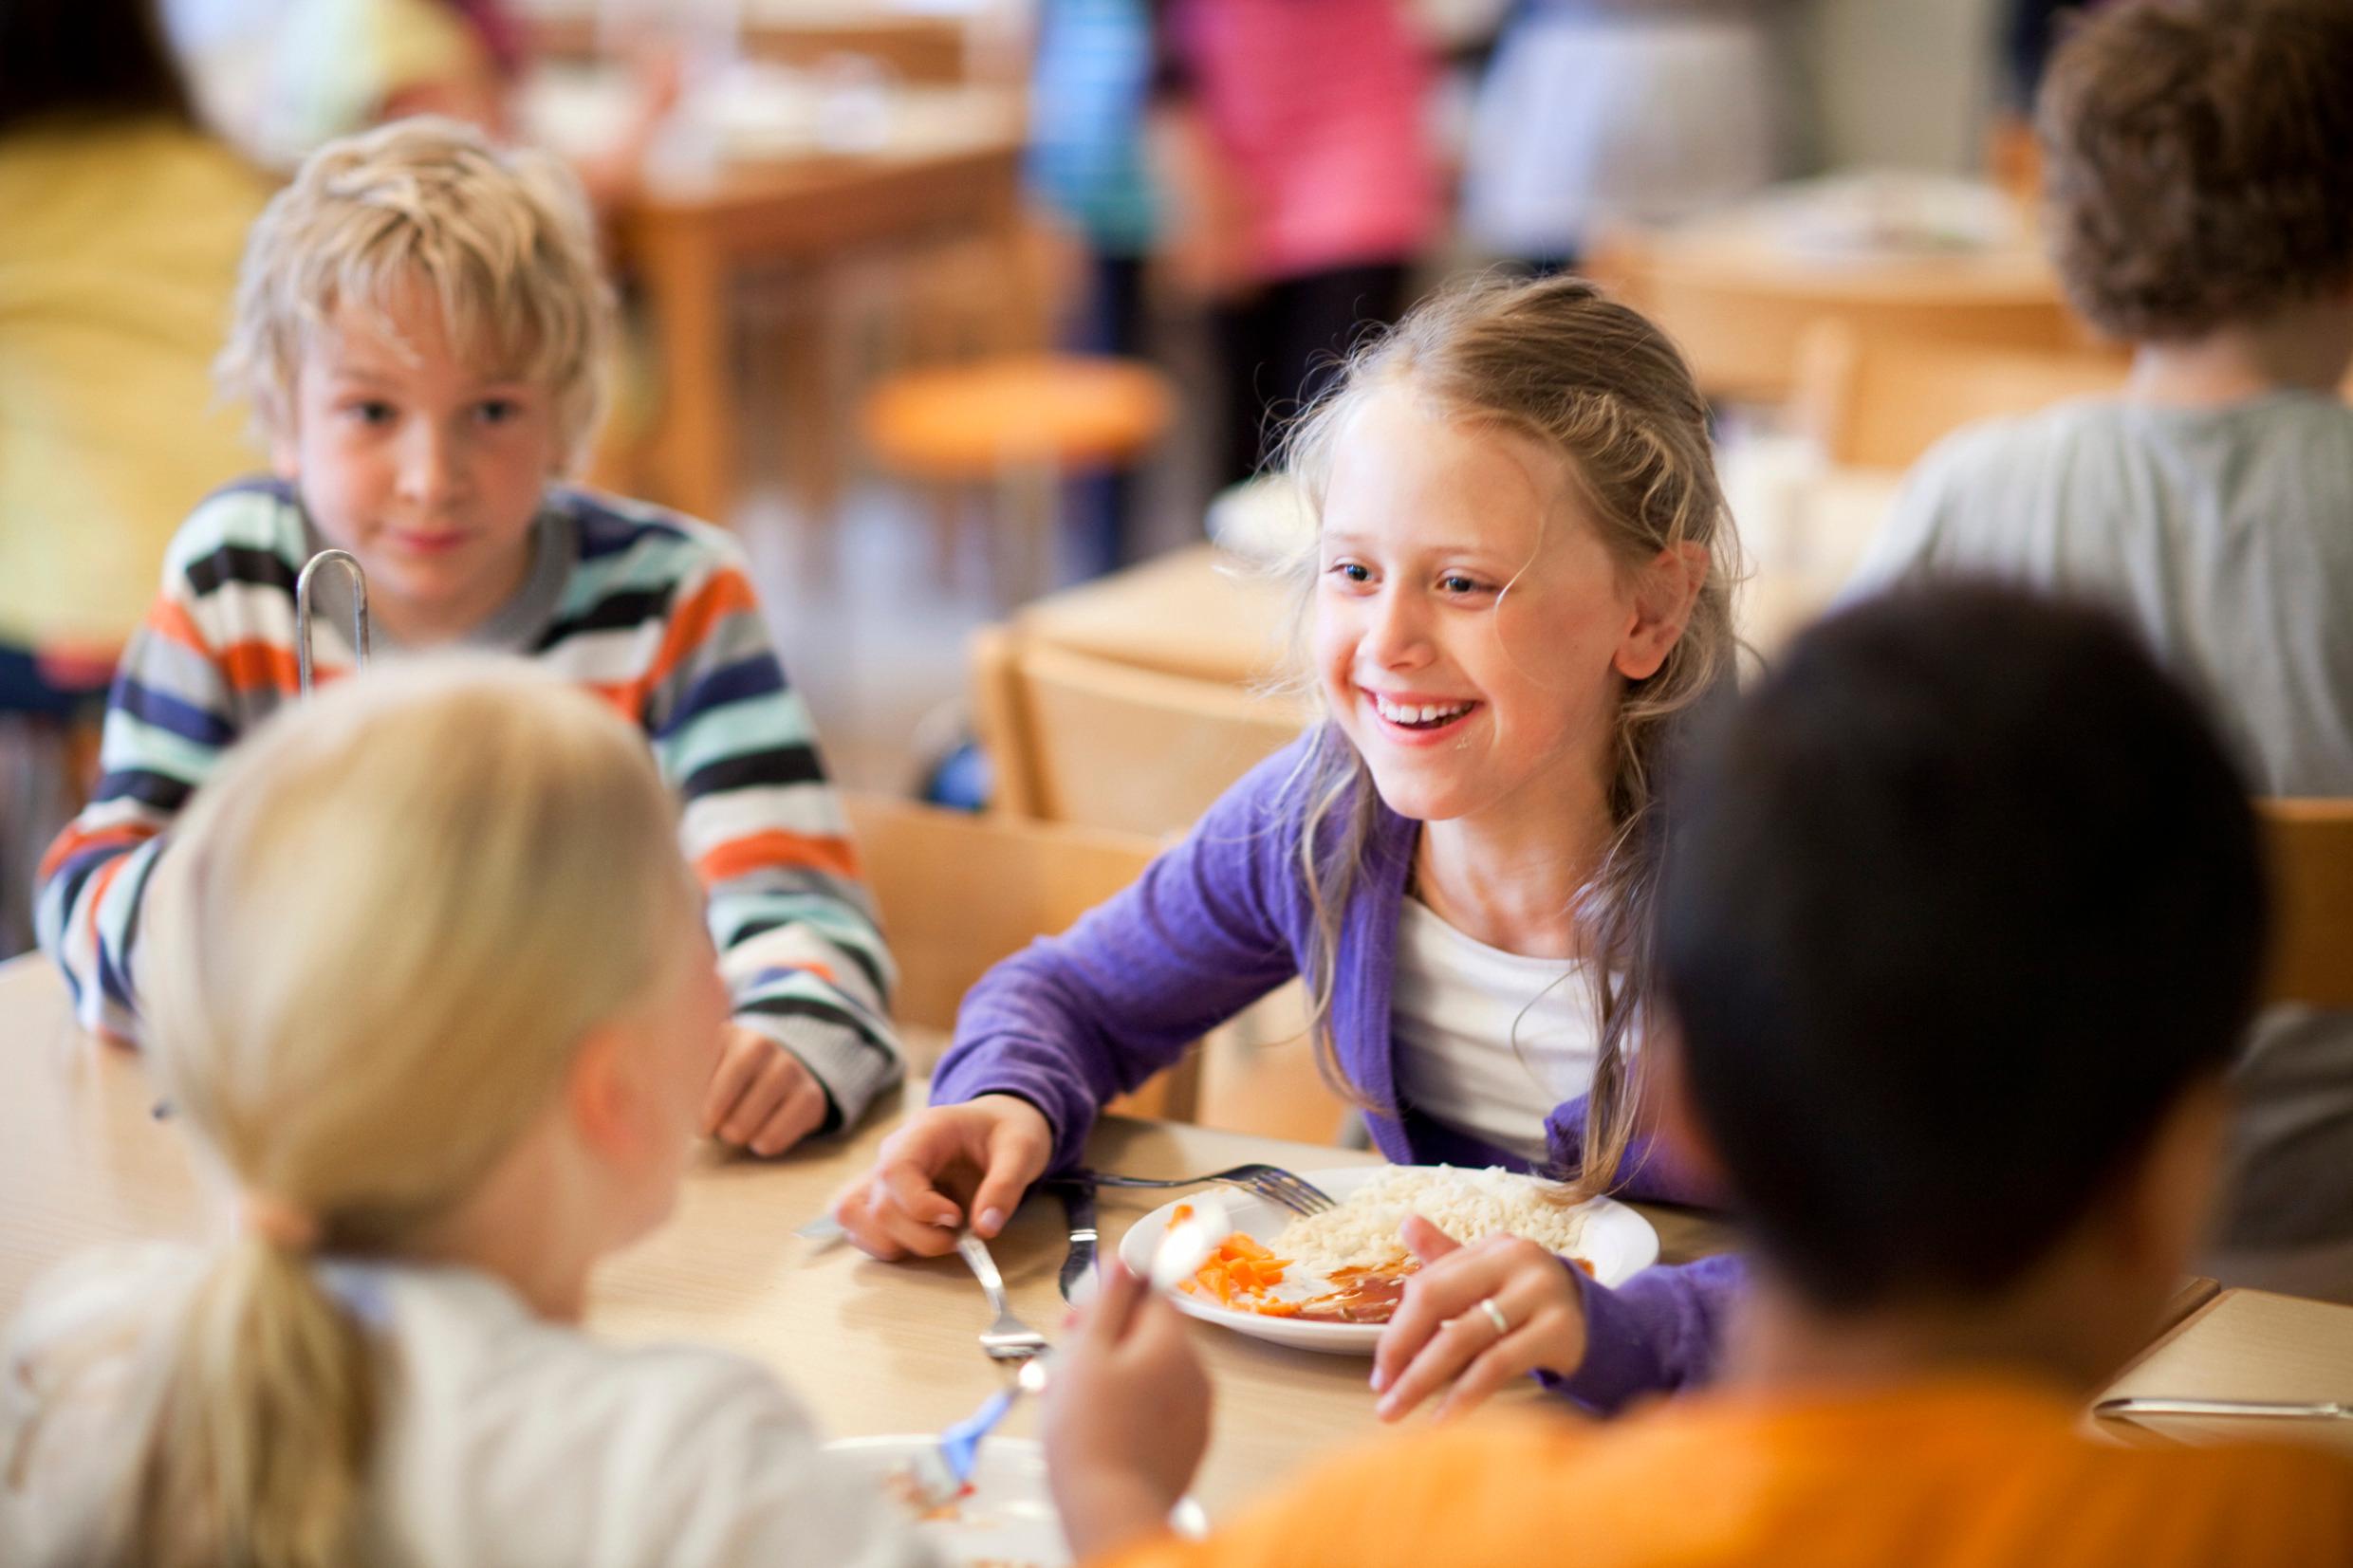 Children sitting at a table eating. A Swedish family can rely on their children getting fed at school.